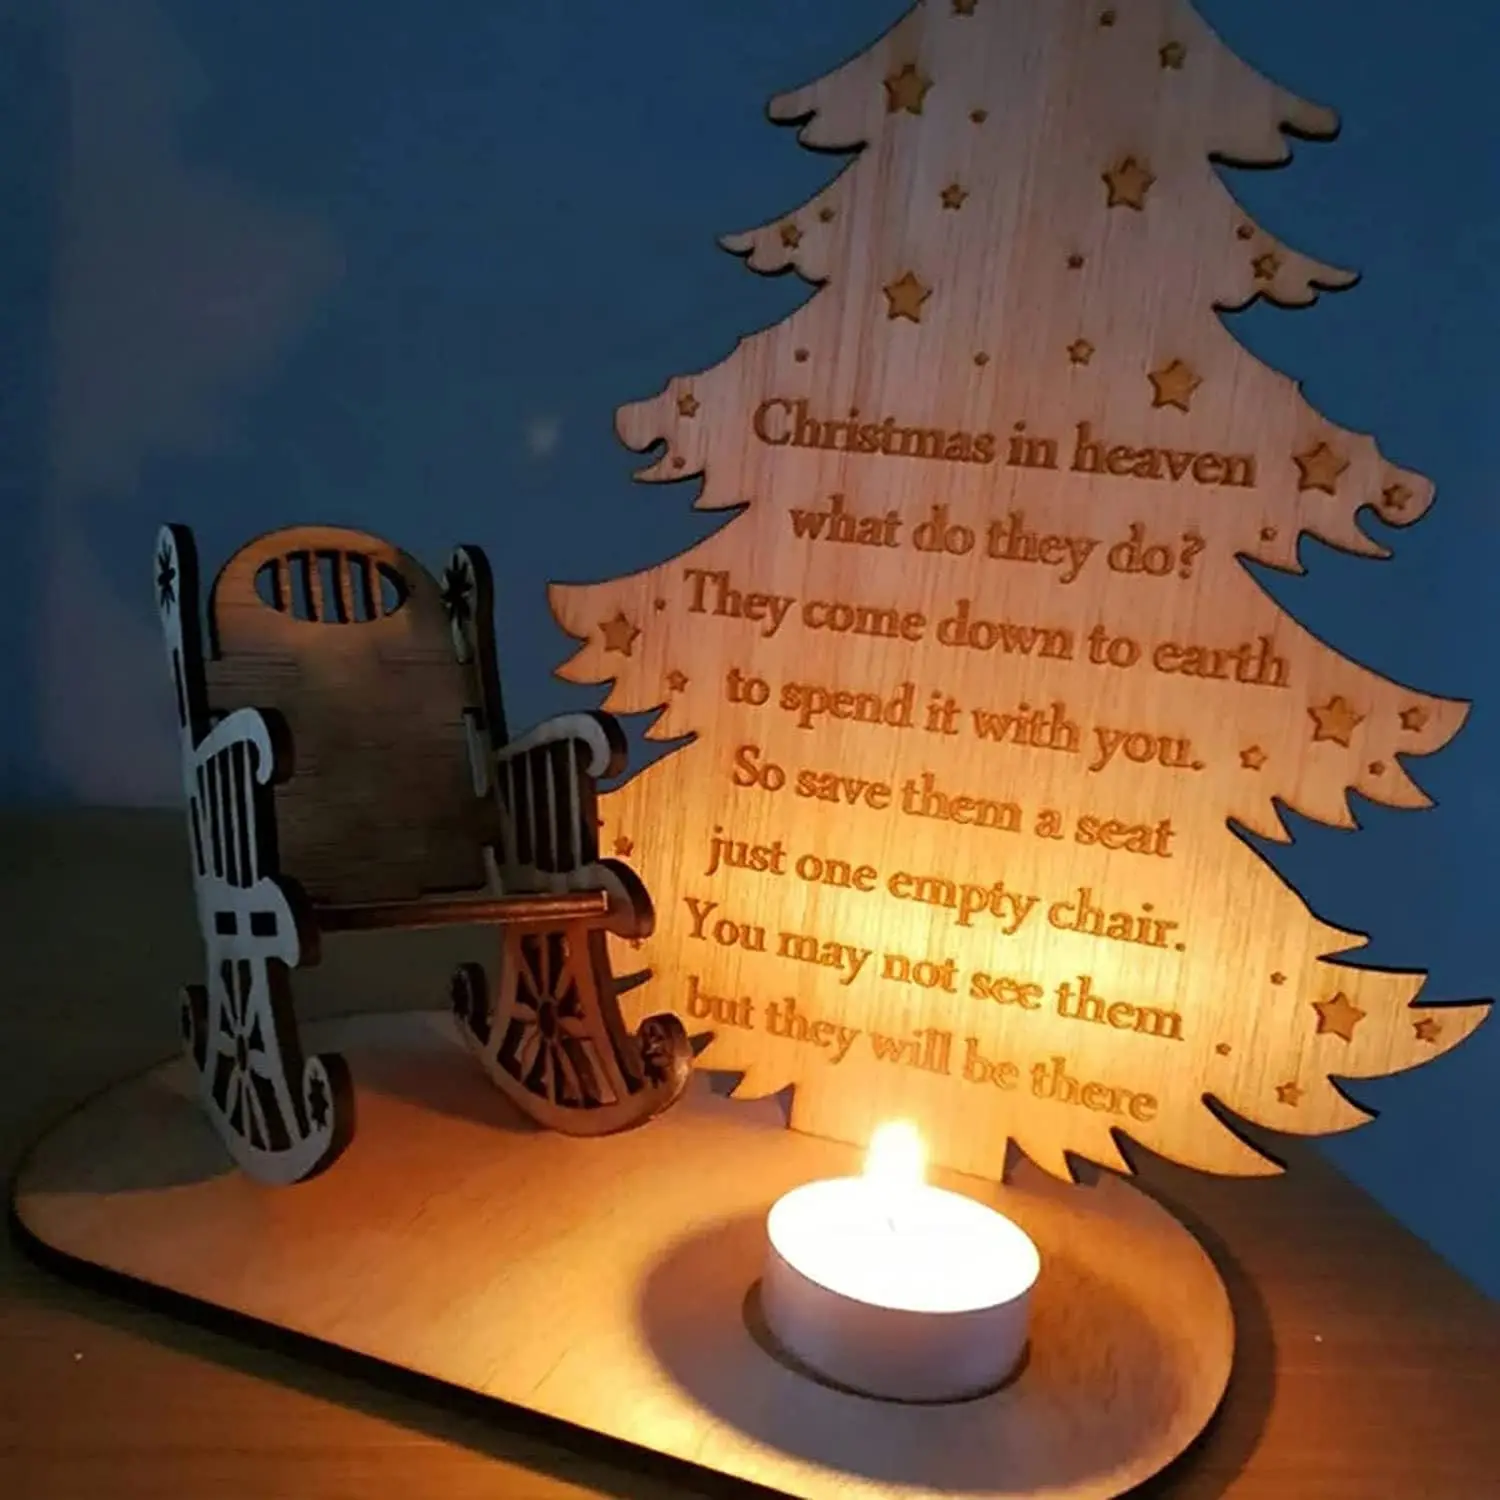 Christmas Remembrance Candle Holder Ornament to Remember Loved Ones Merry Christmas in Heaven Memory Tealight Candlestick Holders with Personalised Chair Christmas Wooden DIY Decoration